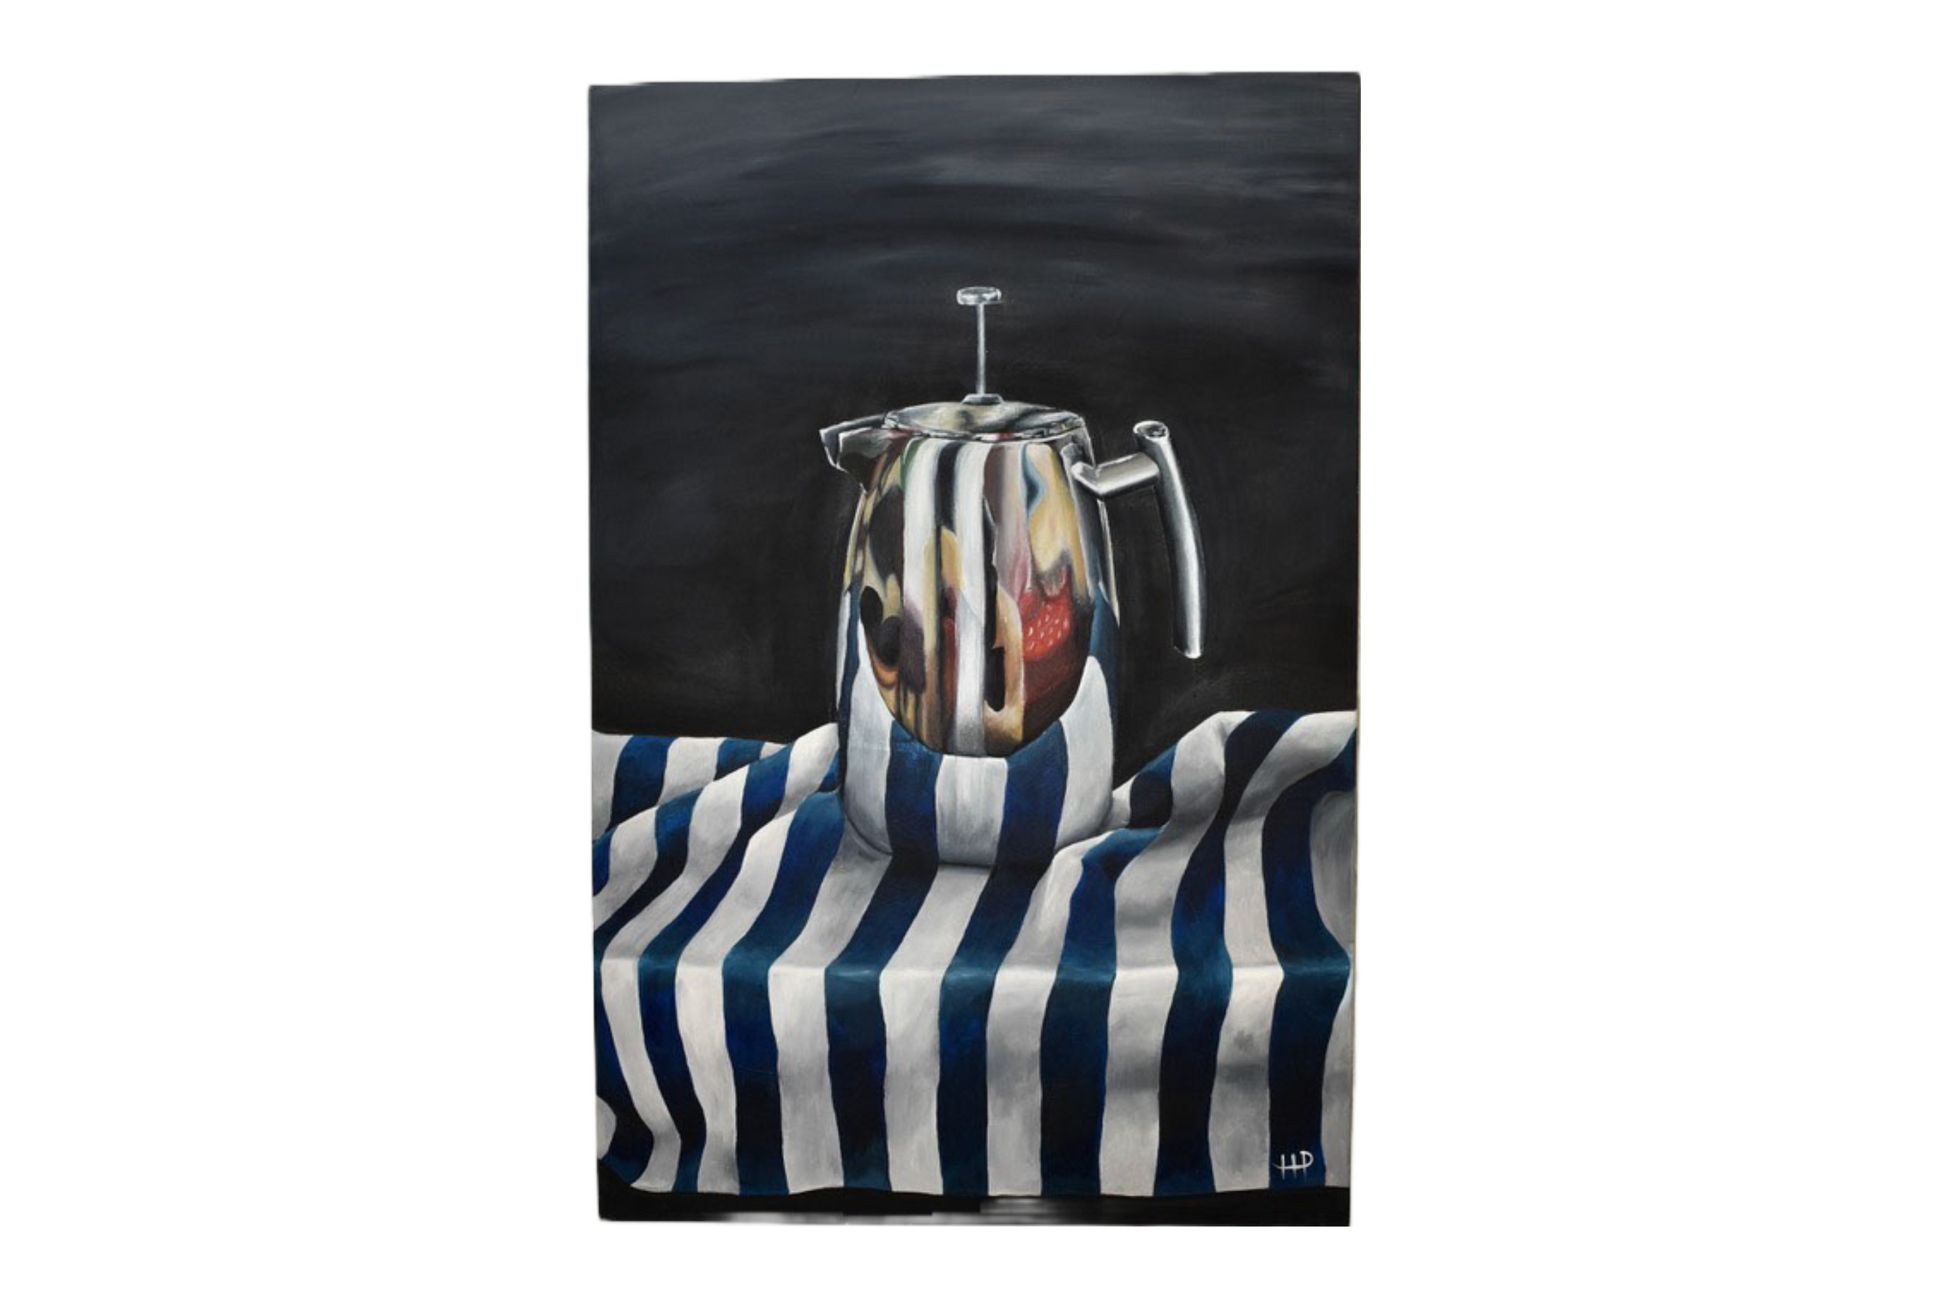 Painting of a coffee pot on a striped cloth against a dark background